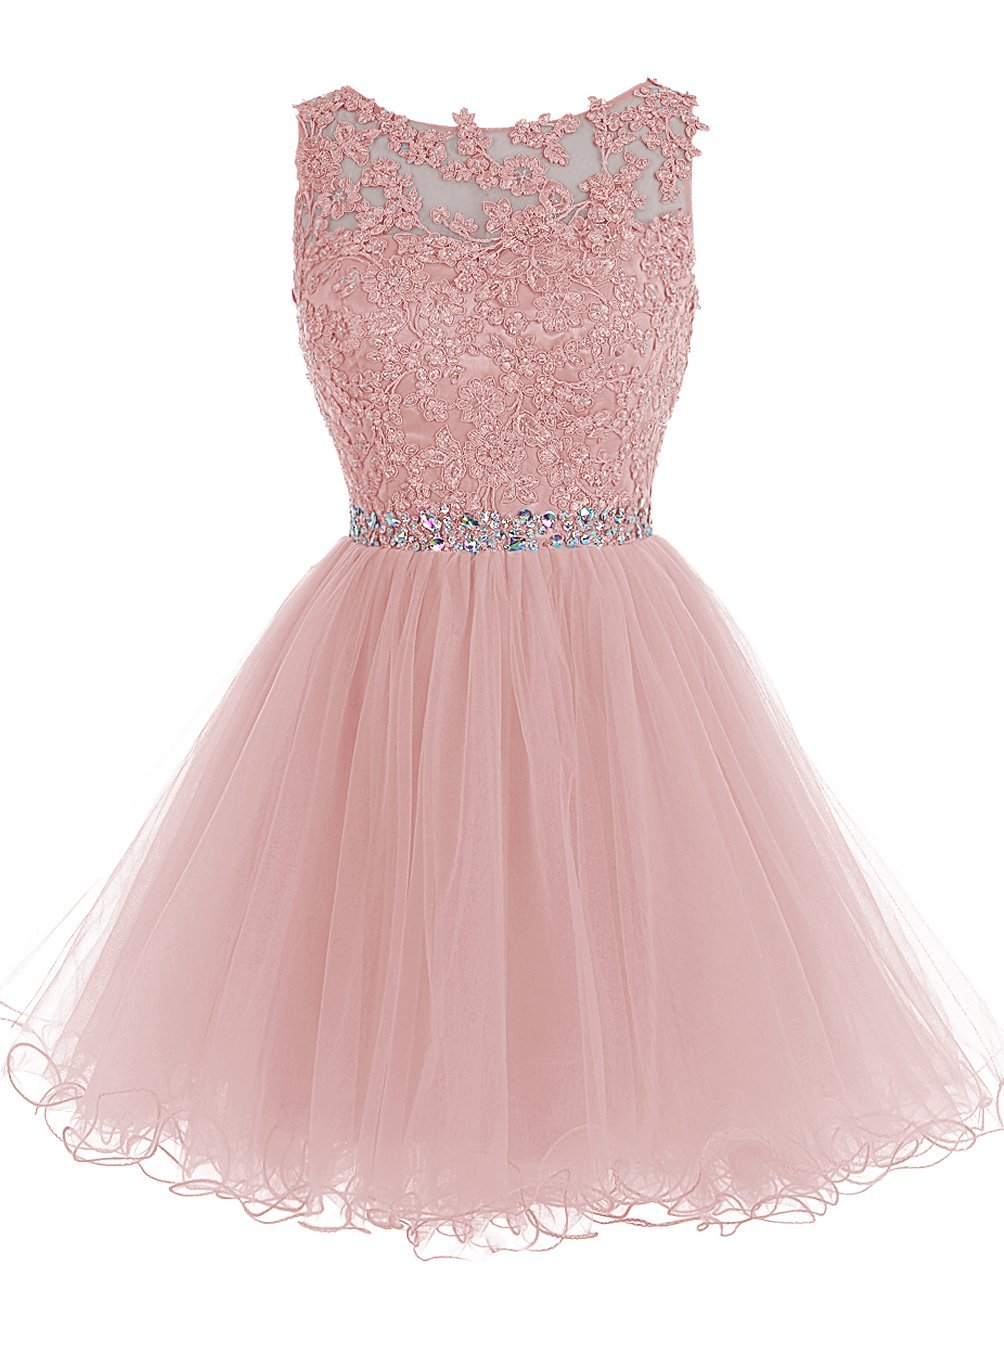 Party Dress Code, Cute Pink Handmade Tulle Beaded Party Dress, Pink Homecoming Dress